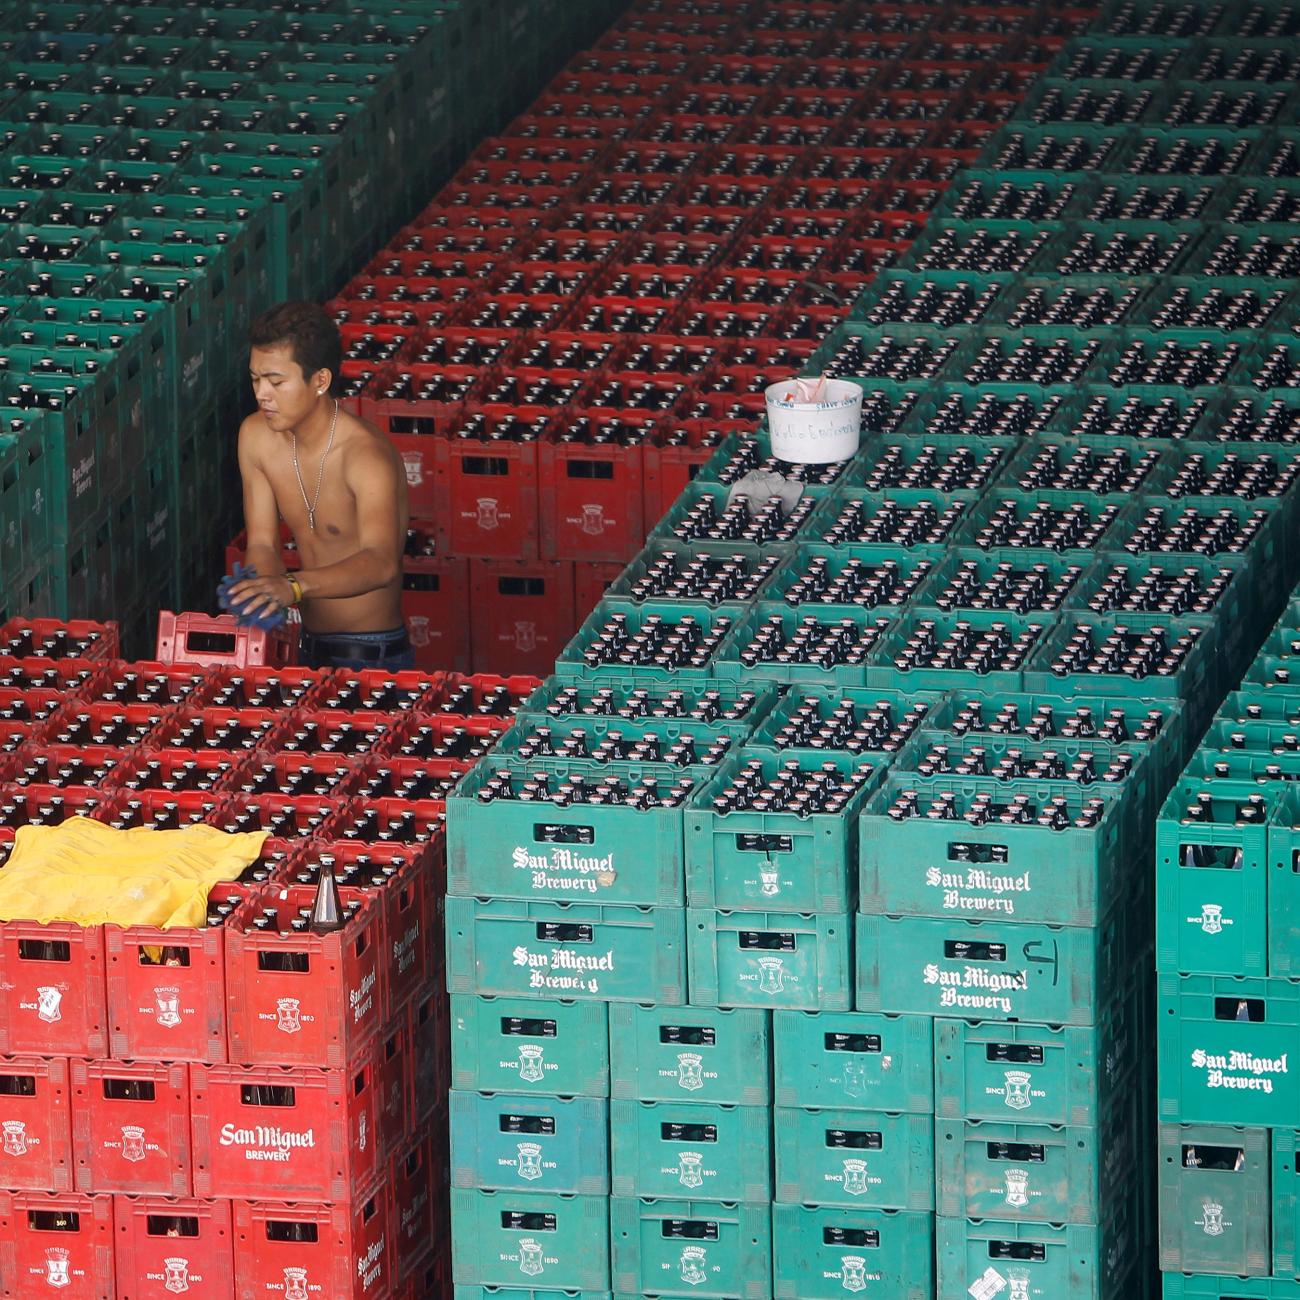 A worker arranges crates of beer before loading them onto a truck inside a San Miguel beer warehouse in Manila, November 14, 2012.